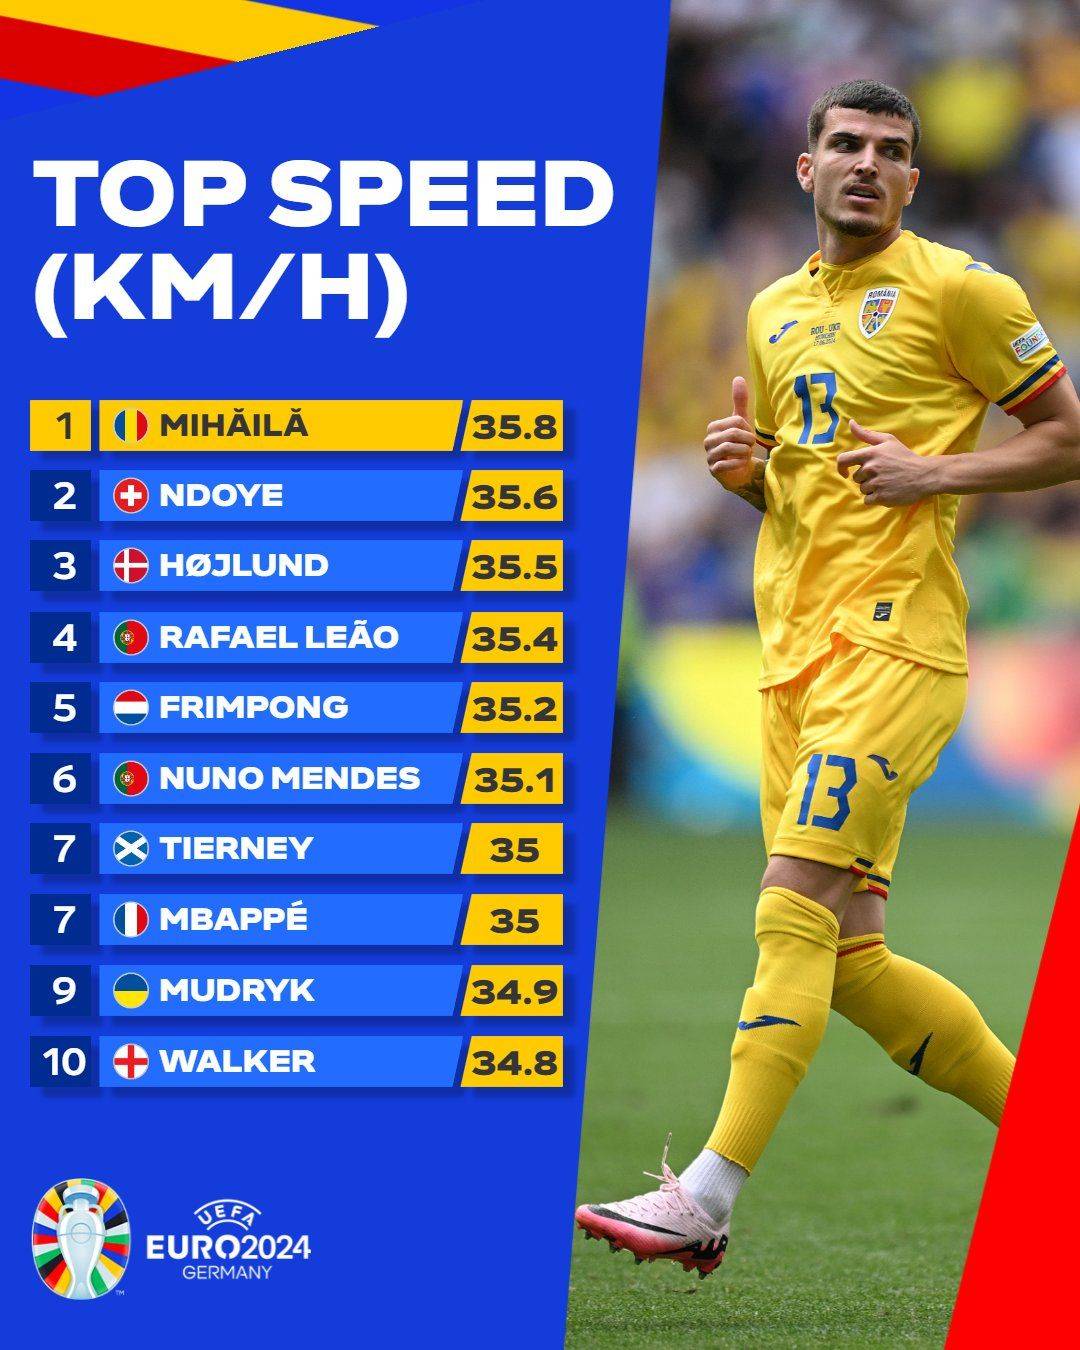 Who is the fastest player at Euro 2024? Romanian midfielder Mircea stays in the lead with a top speed of .m km/h so far